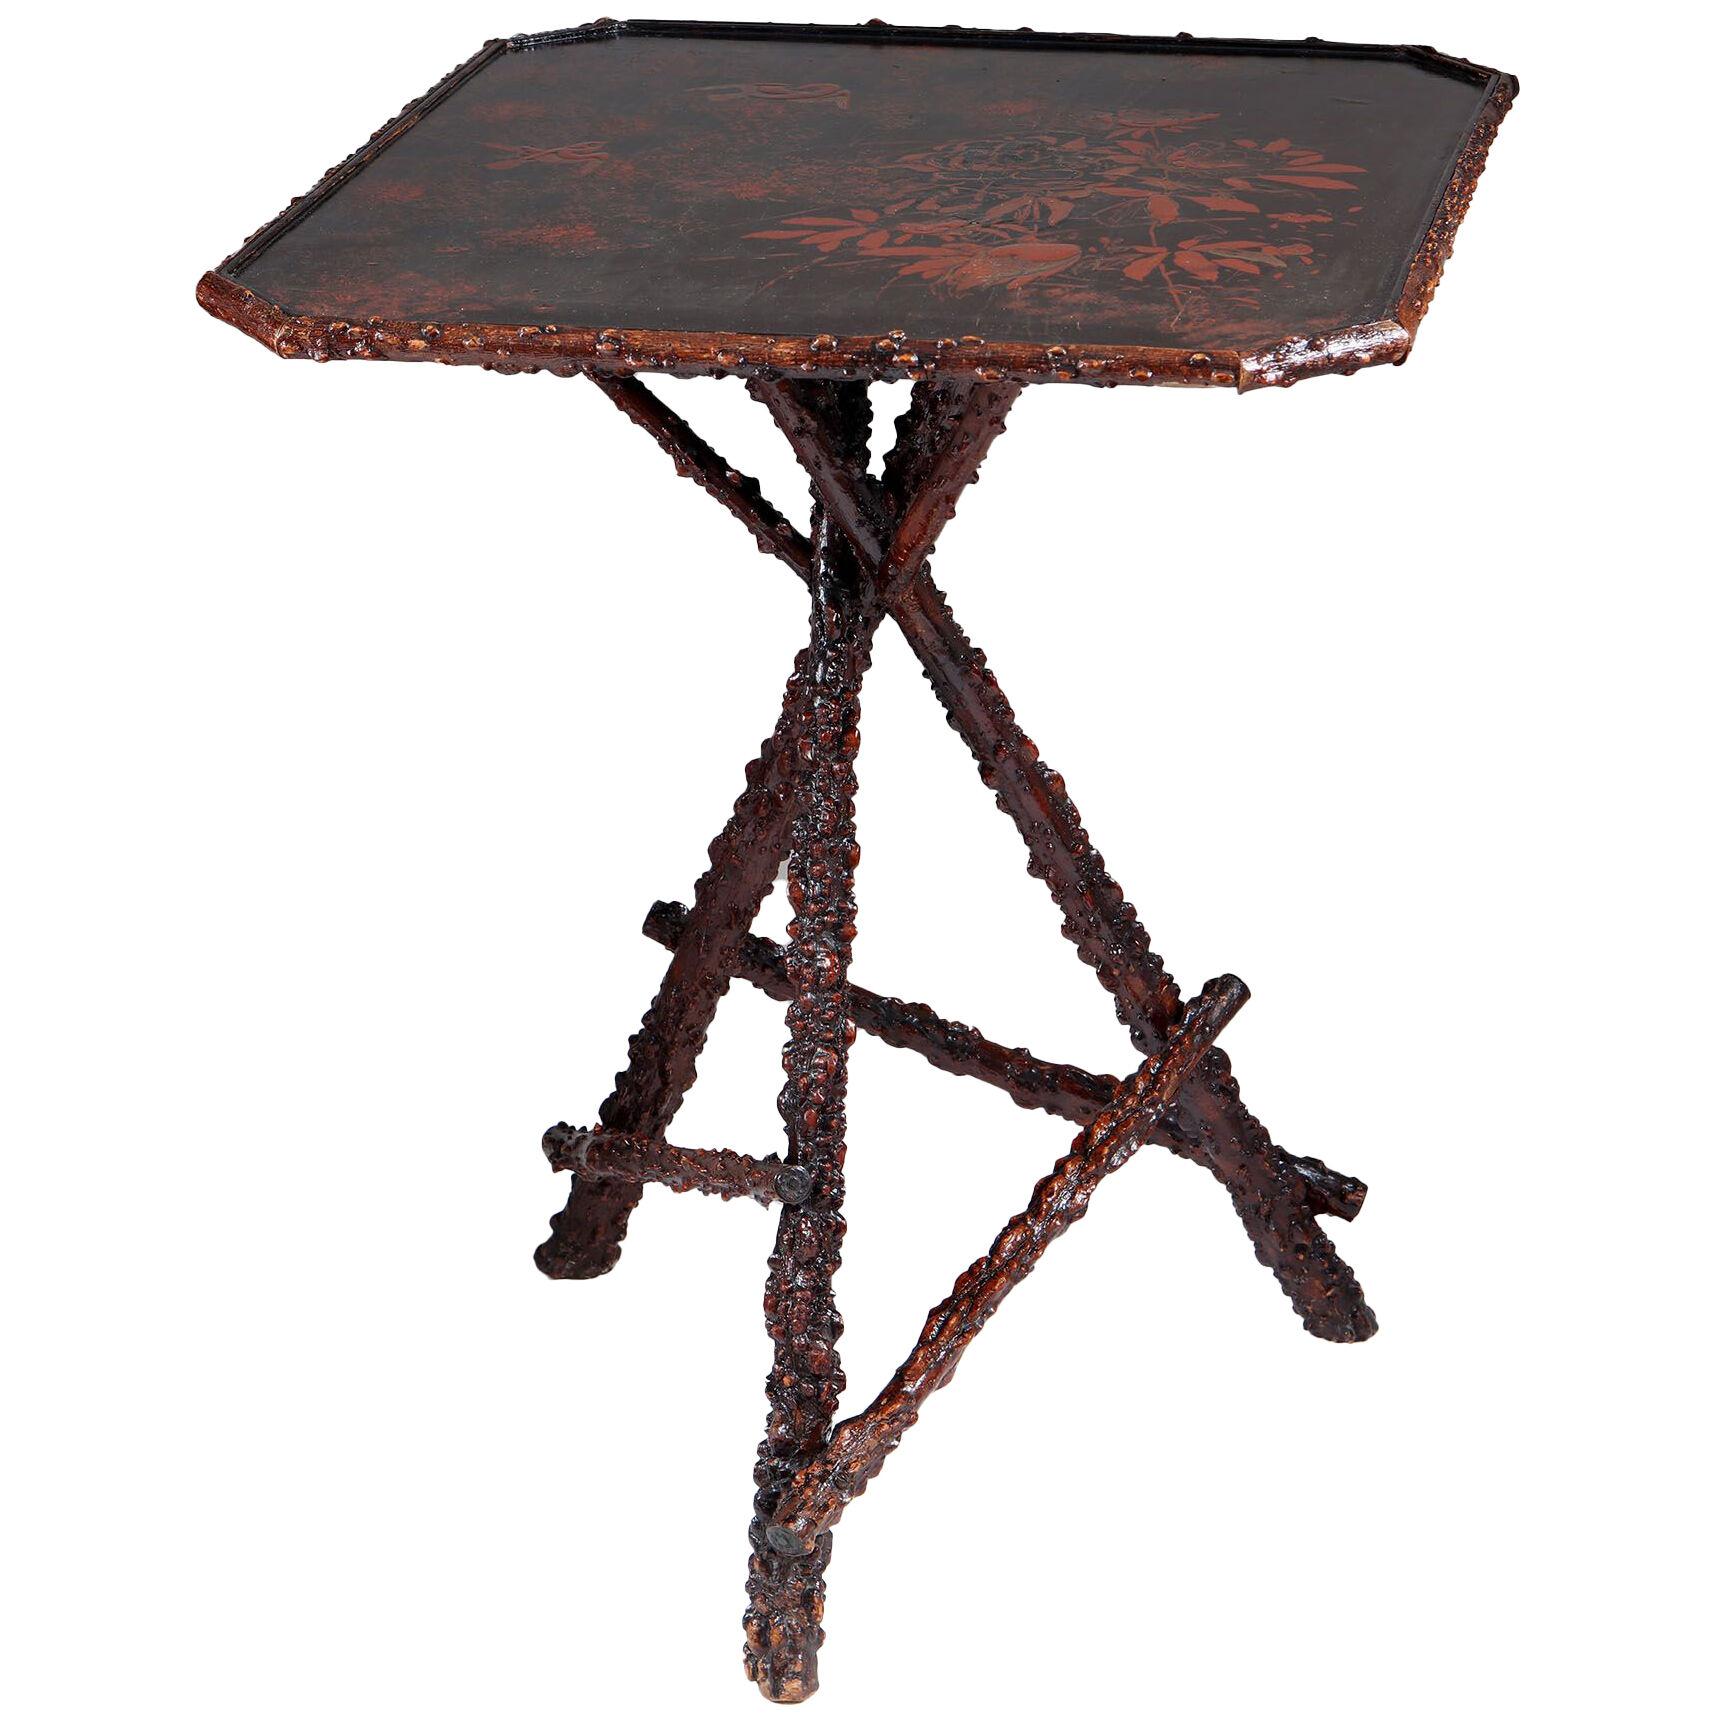 A Victorian rustic table with lacquered top